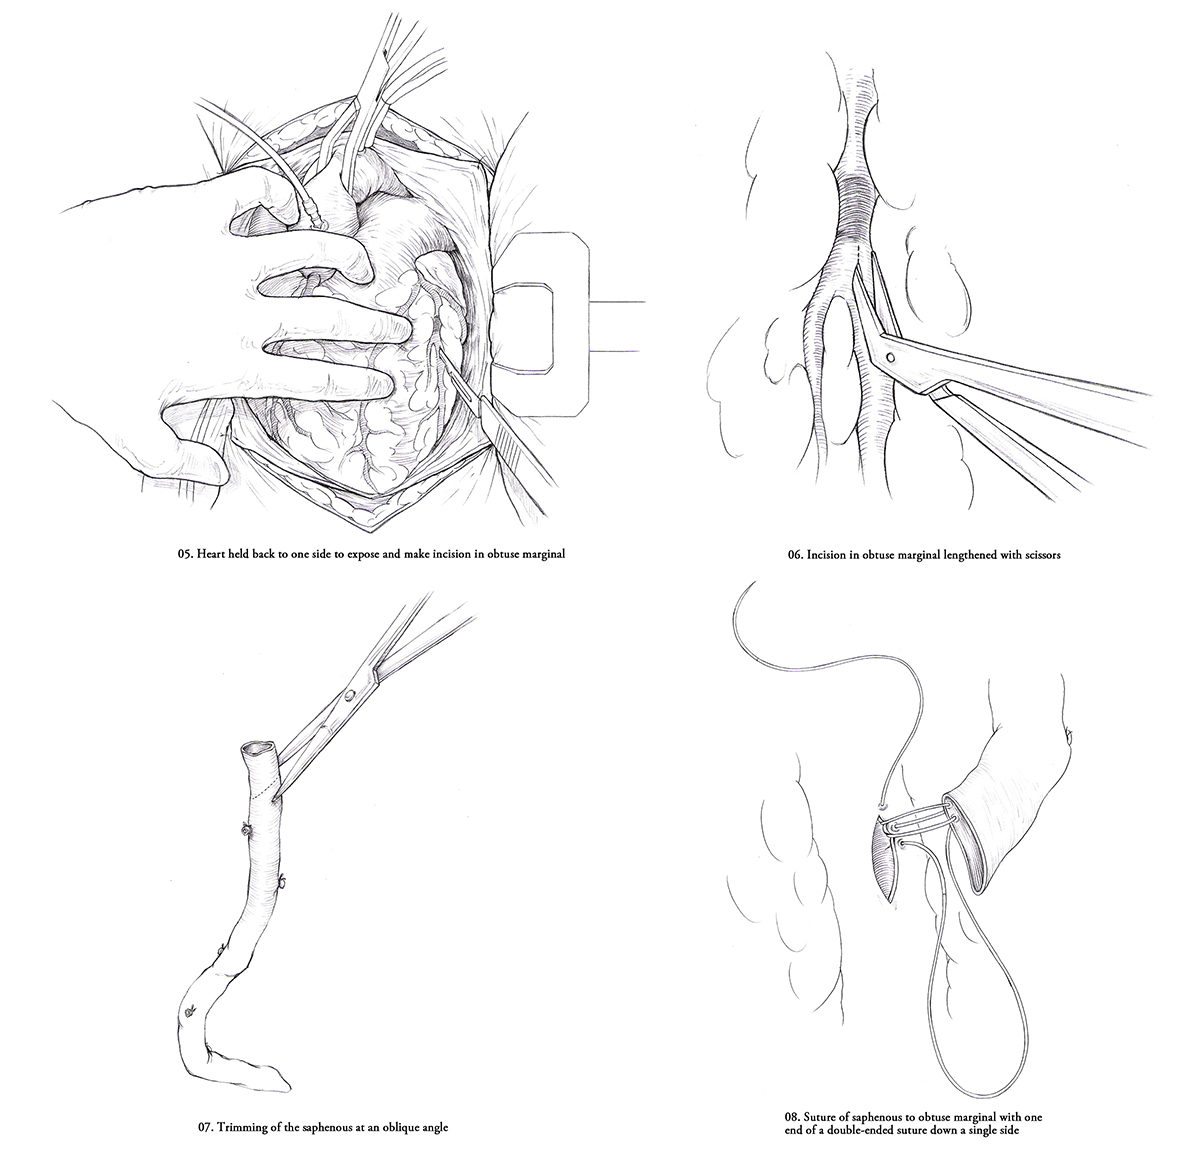 Coronary bypass sketches